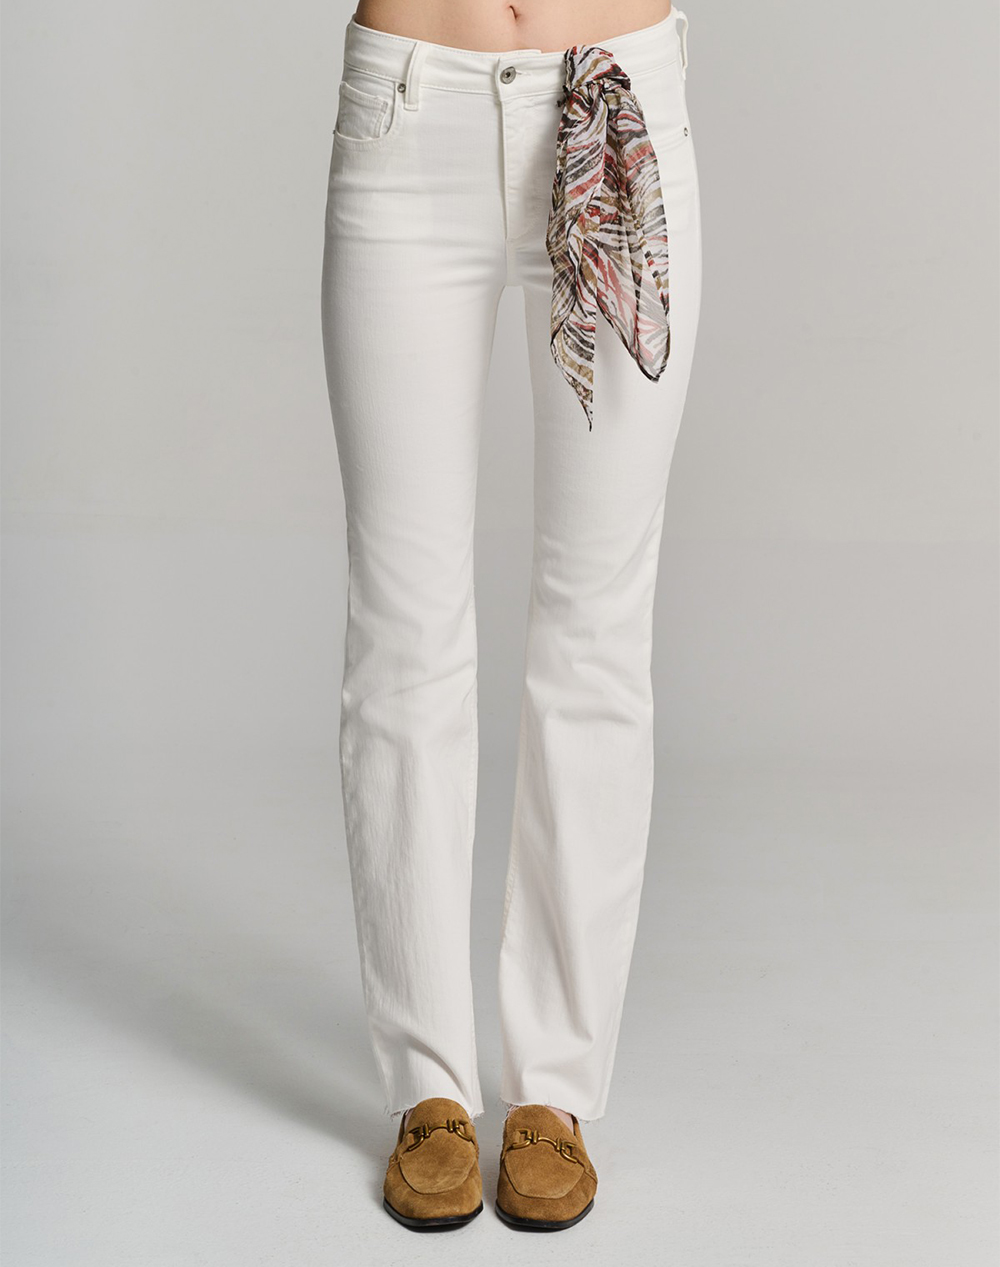 STAFF Beatrice Woman Pant 5-905.068.9.051-Ν0024 OffWhite